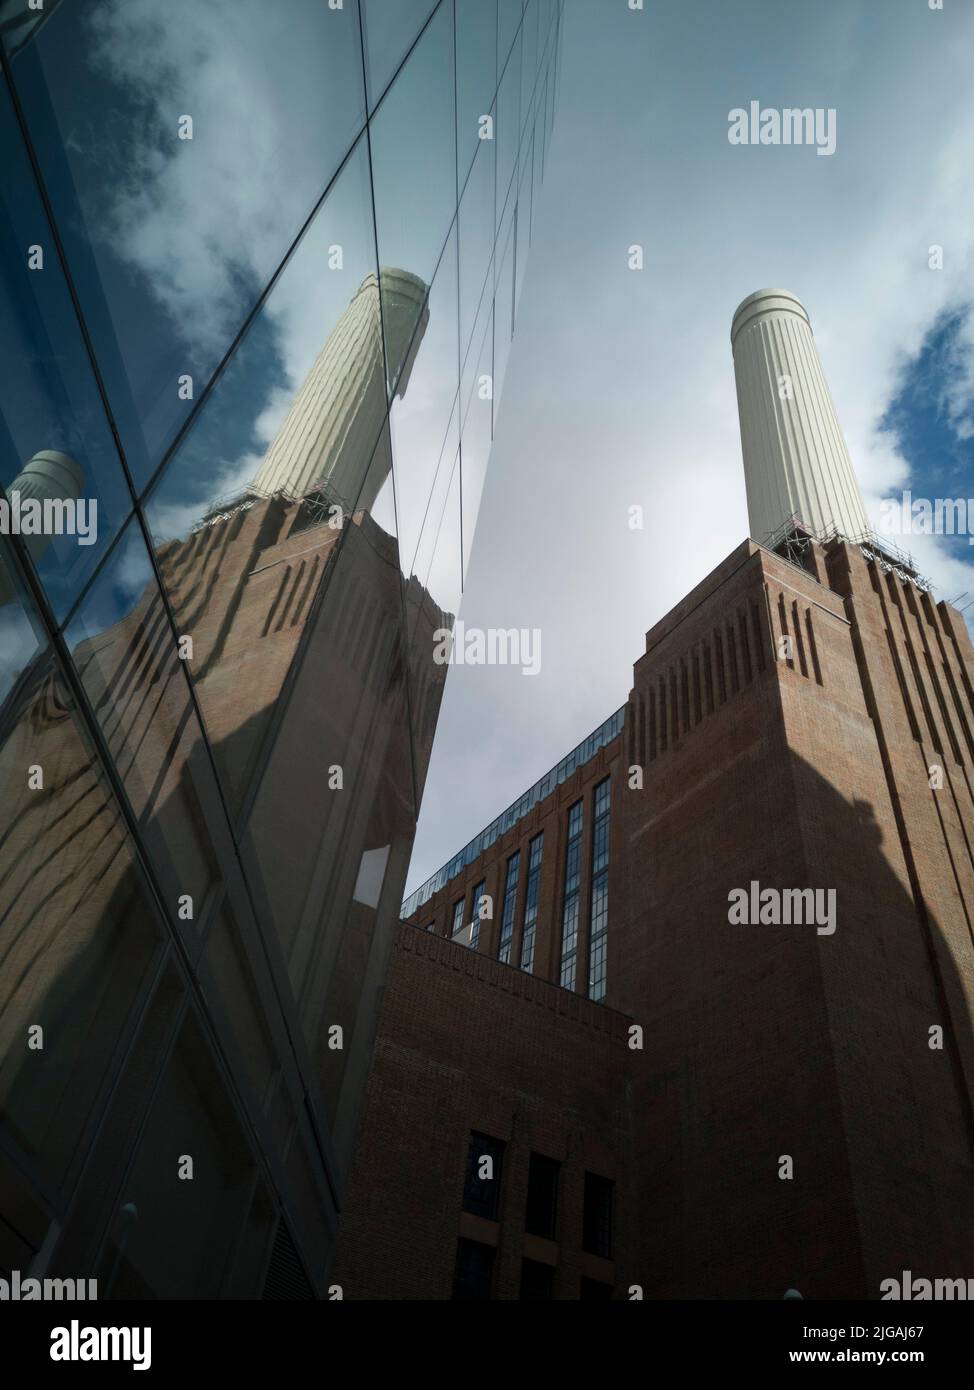 Around Battersea Power Station, London, UK, Oct 2021. The reconditioned towers of the now repurposed Battersea Power Station. Stock Photo